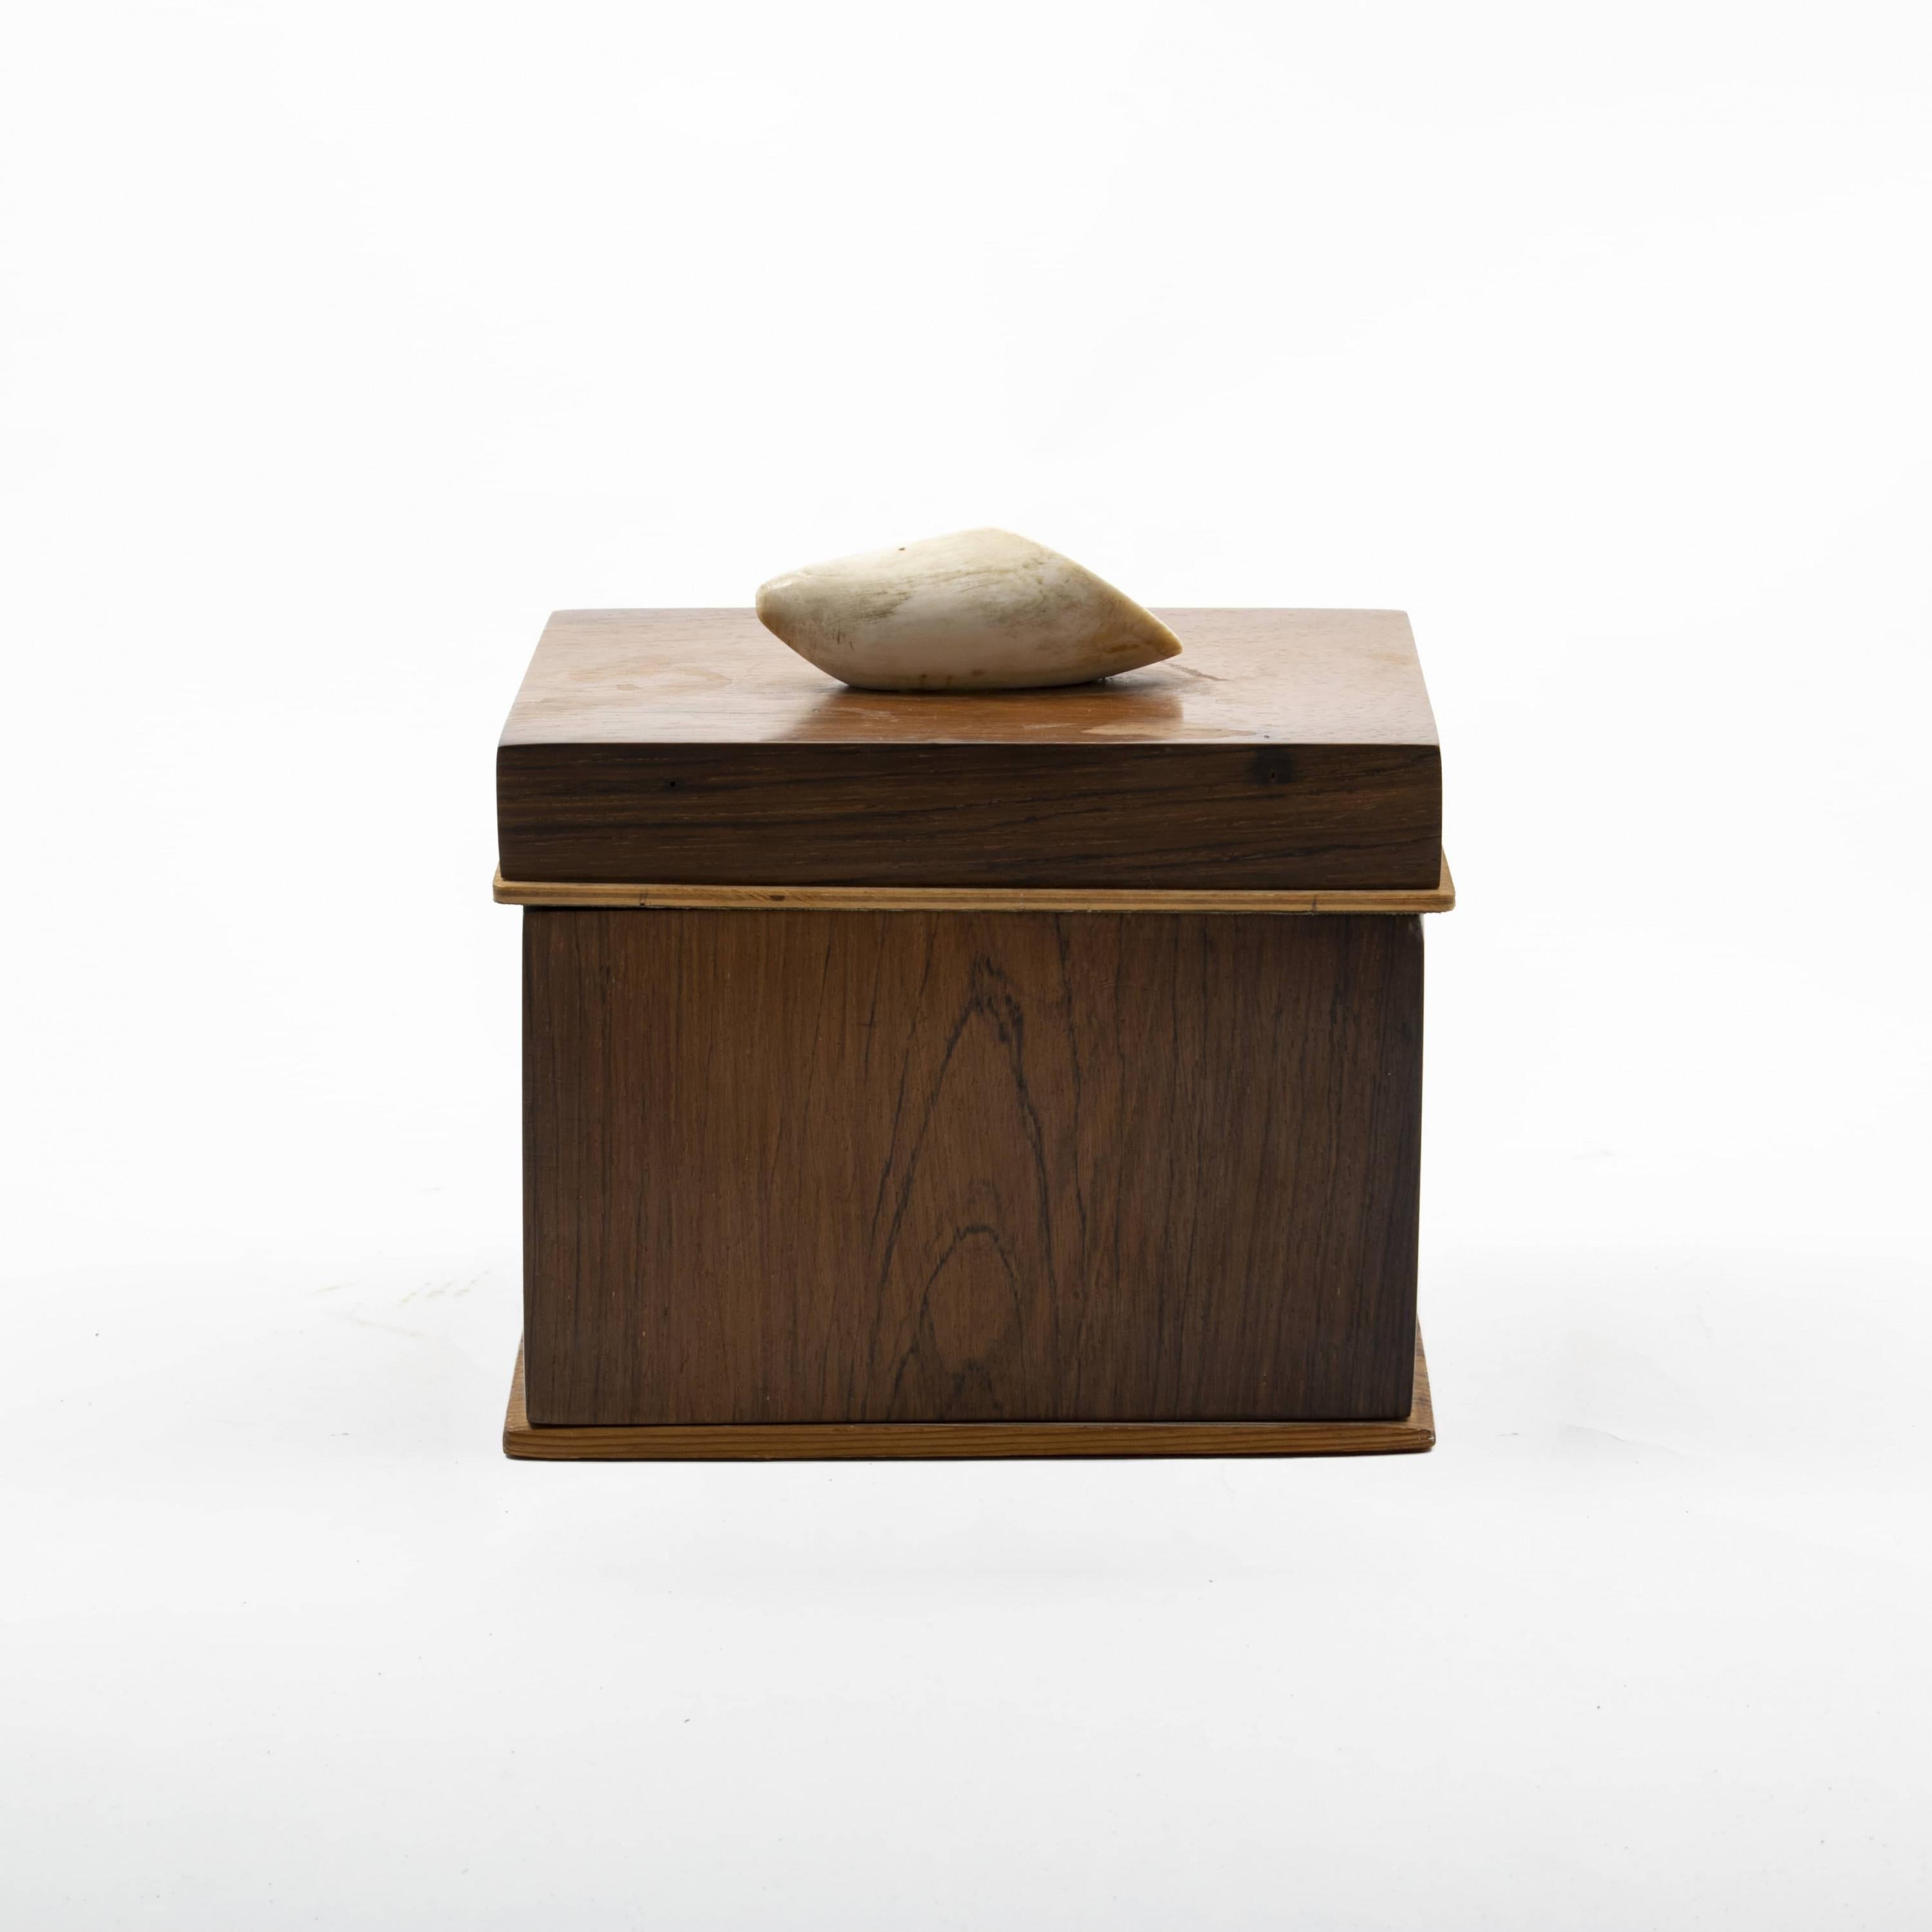 Danish Late Empire Tobacco Box in Nobel Wood, Lid with Walrus Tooth In Good Condition For Sale In Kastrup, DK